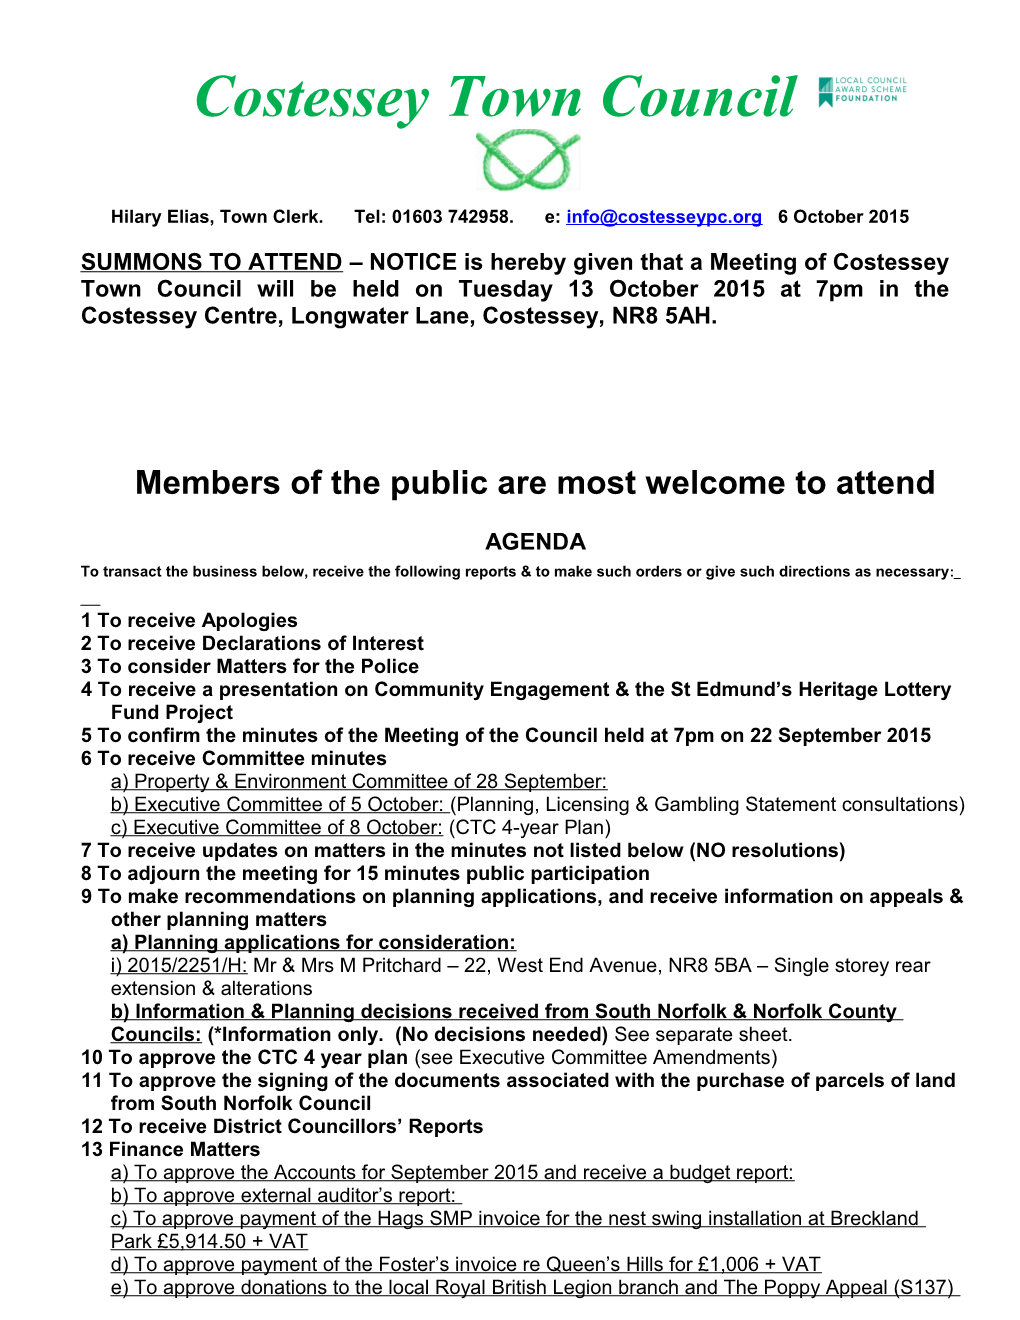 Meeting of the Parish Council to Be Held at 7Pm On